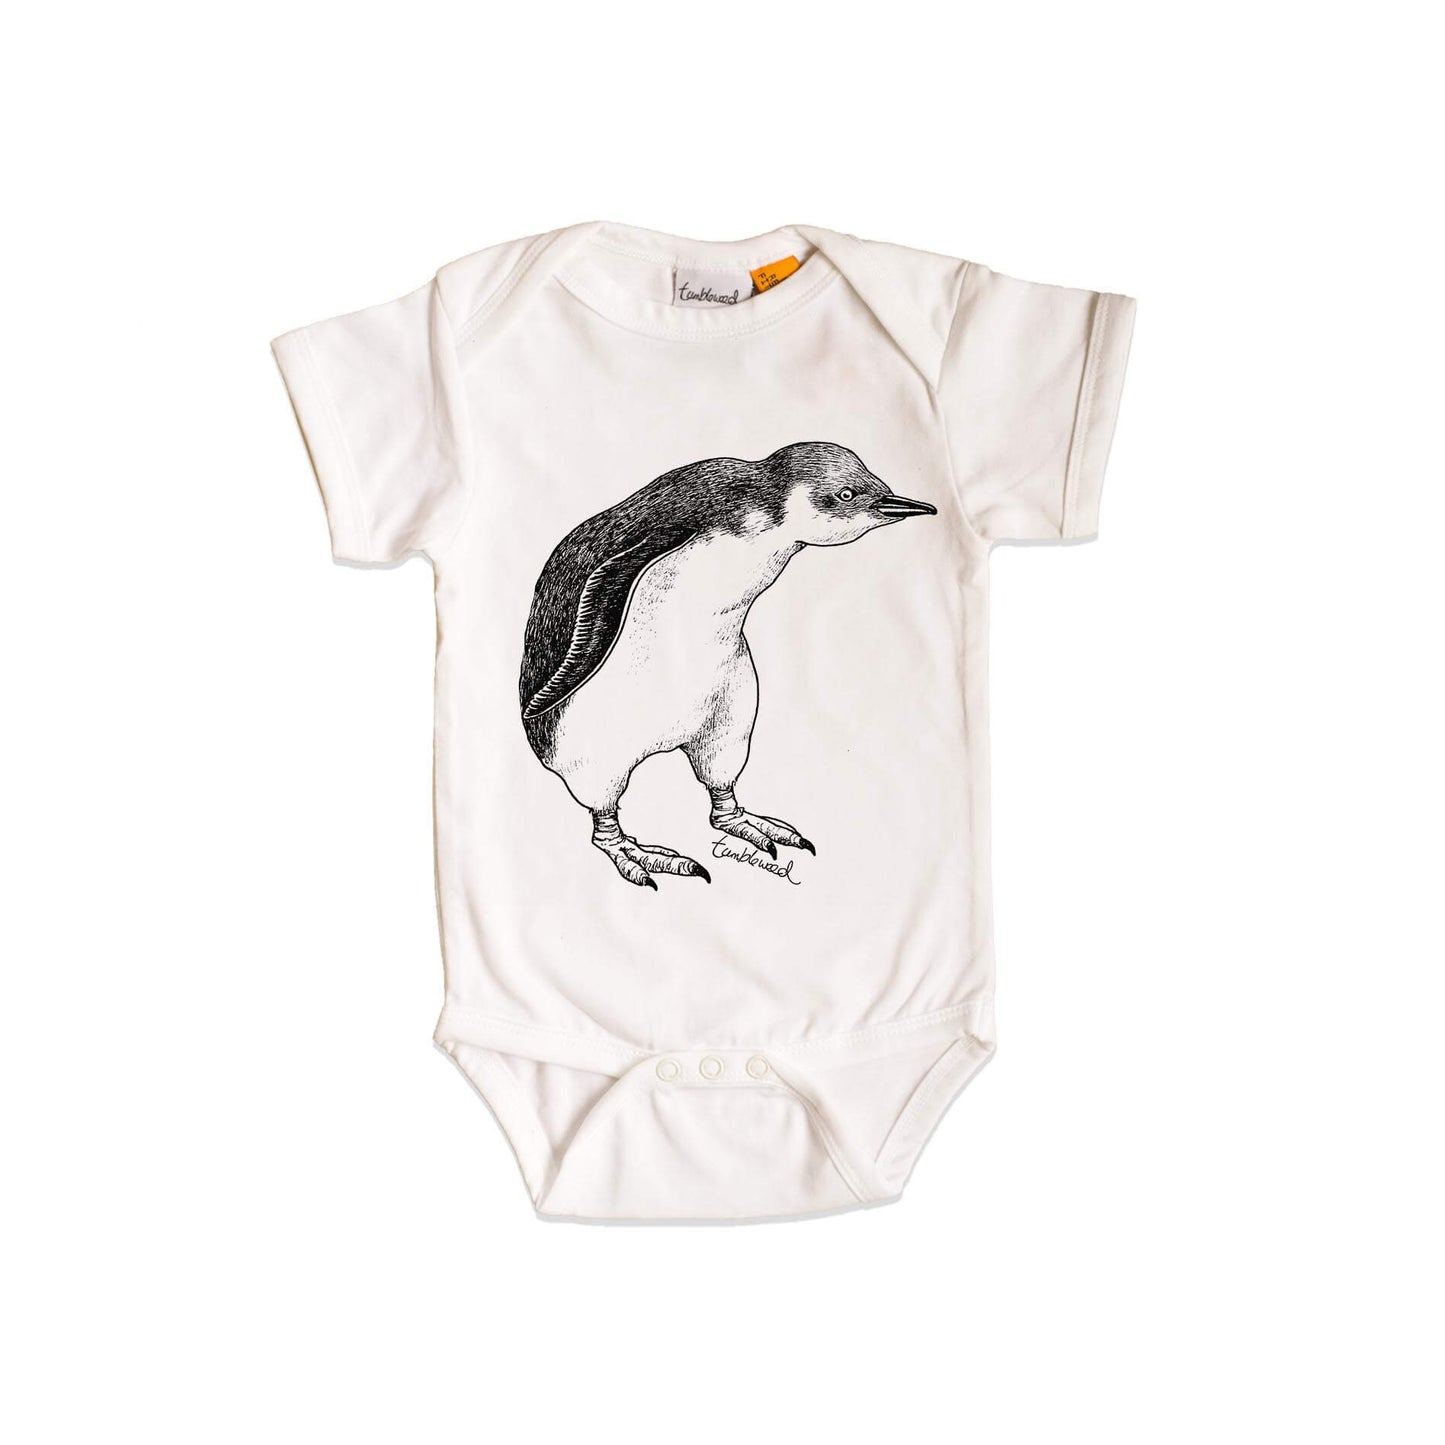 Short sleeved, white, organic cotton, baby onesie featuring a screen printed Little Blue Penguin design.